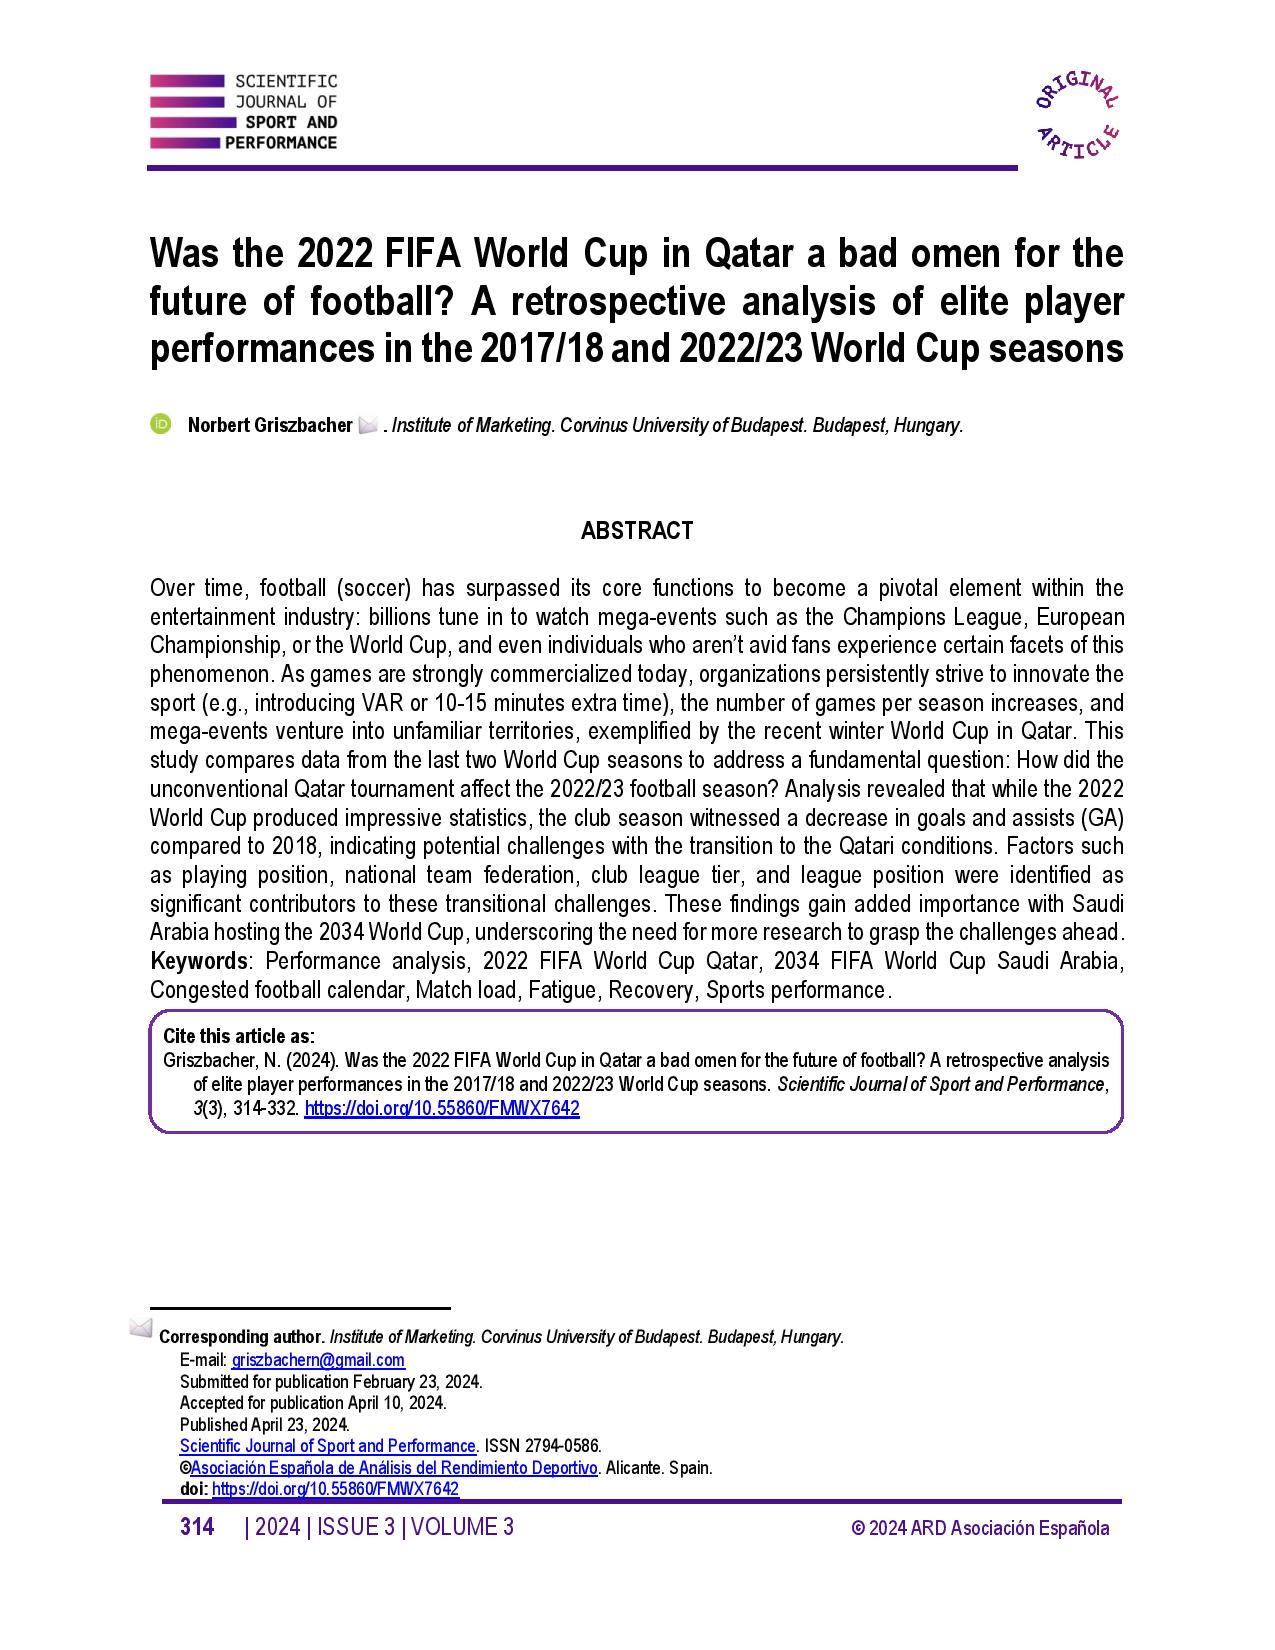 Was the 2022 FIFA World Cup in Qatar a bad omen for the future of football? A retrospective analysis of elite player performances in the 2017/18 and 2022/23 World Cup seasons